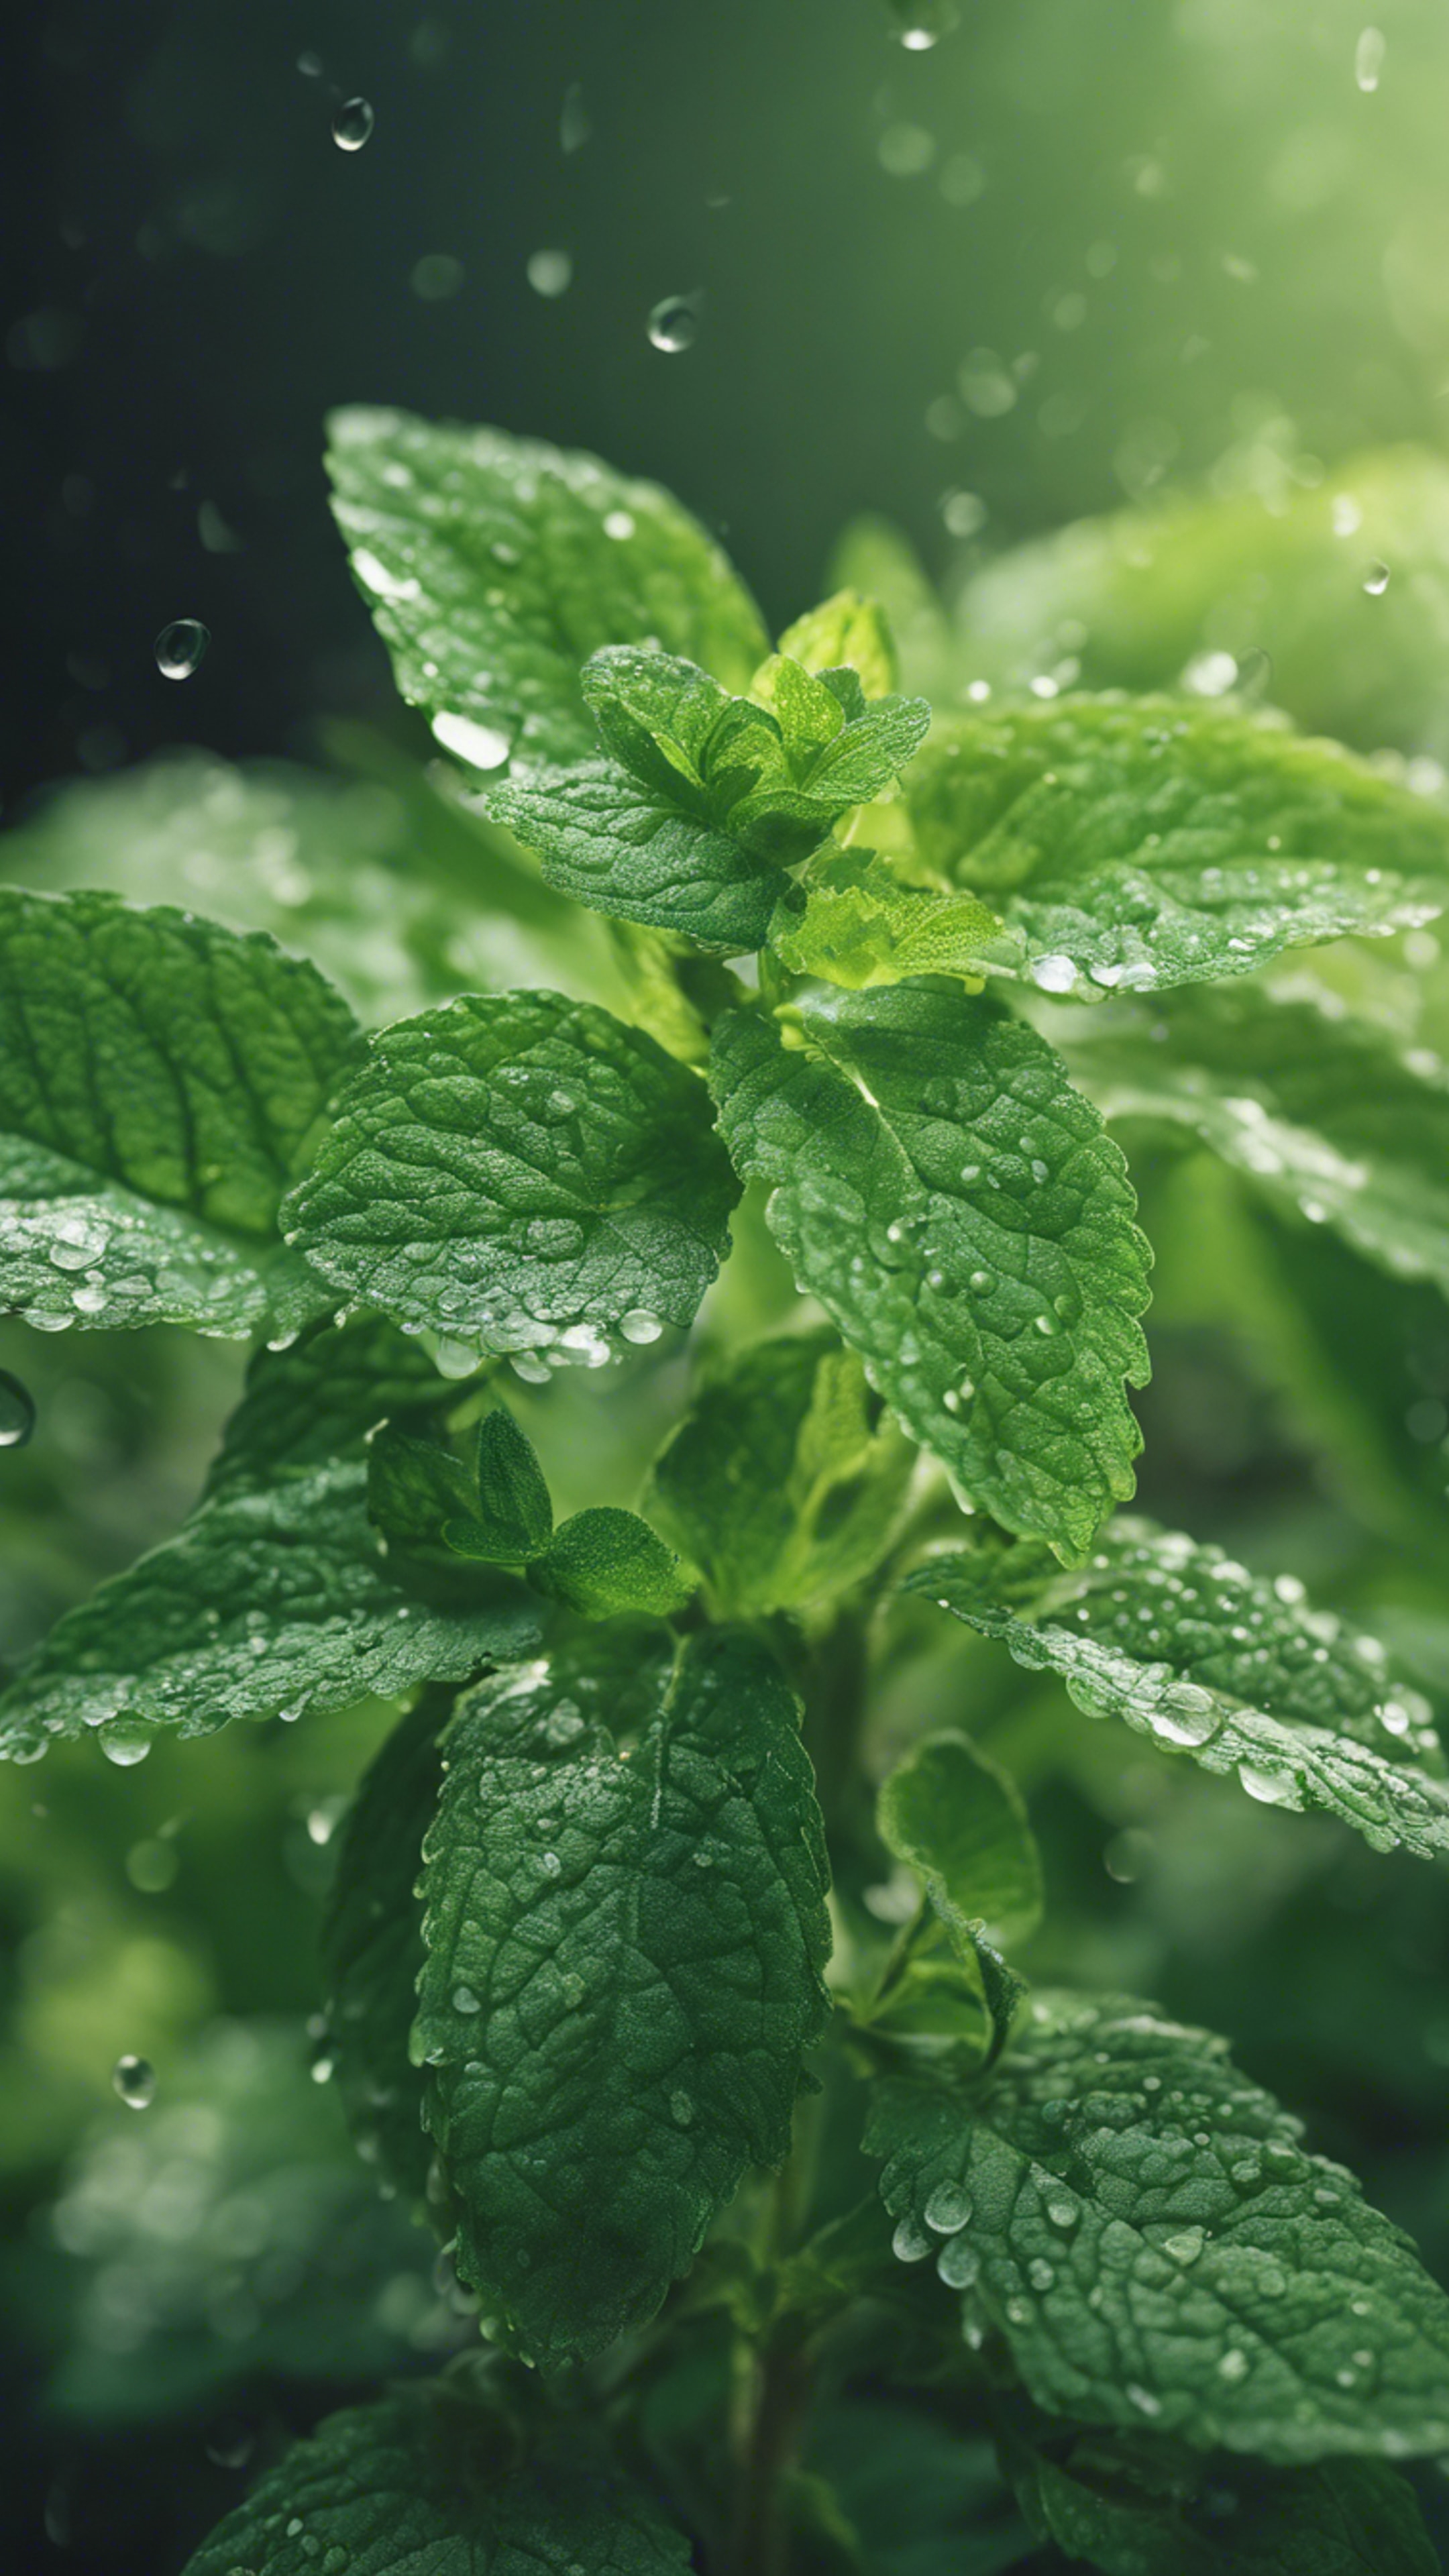 A closeup of a refreshing mint plant with dew drops on its fresh green leaves. Wallpaper[bde7a5587e54449fbb31]